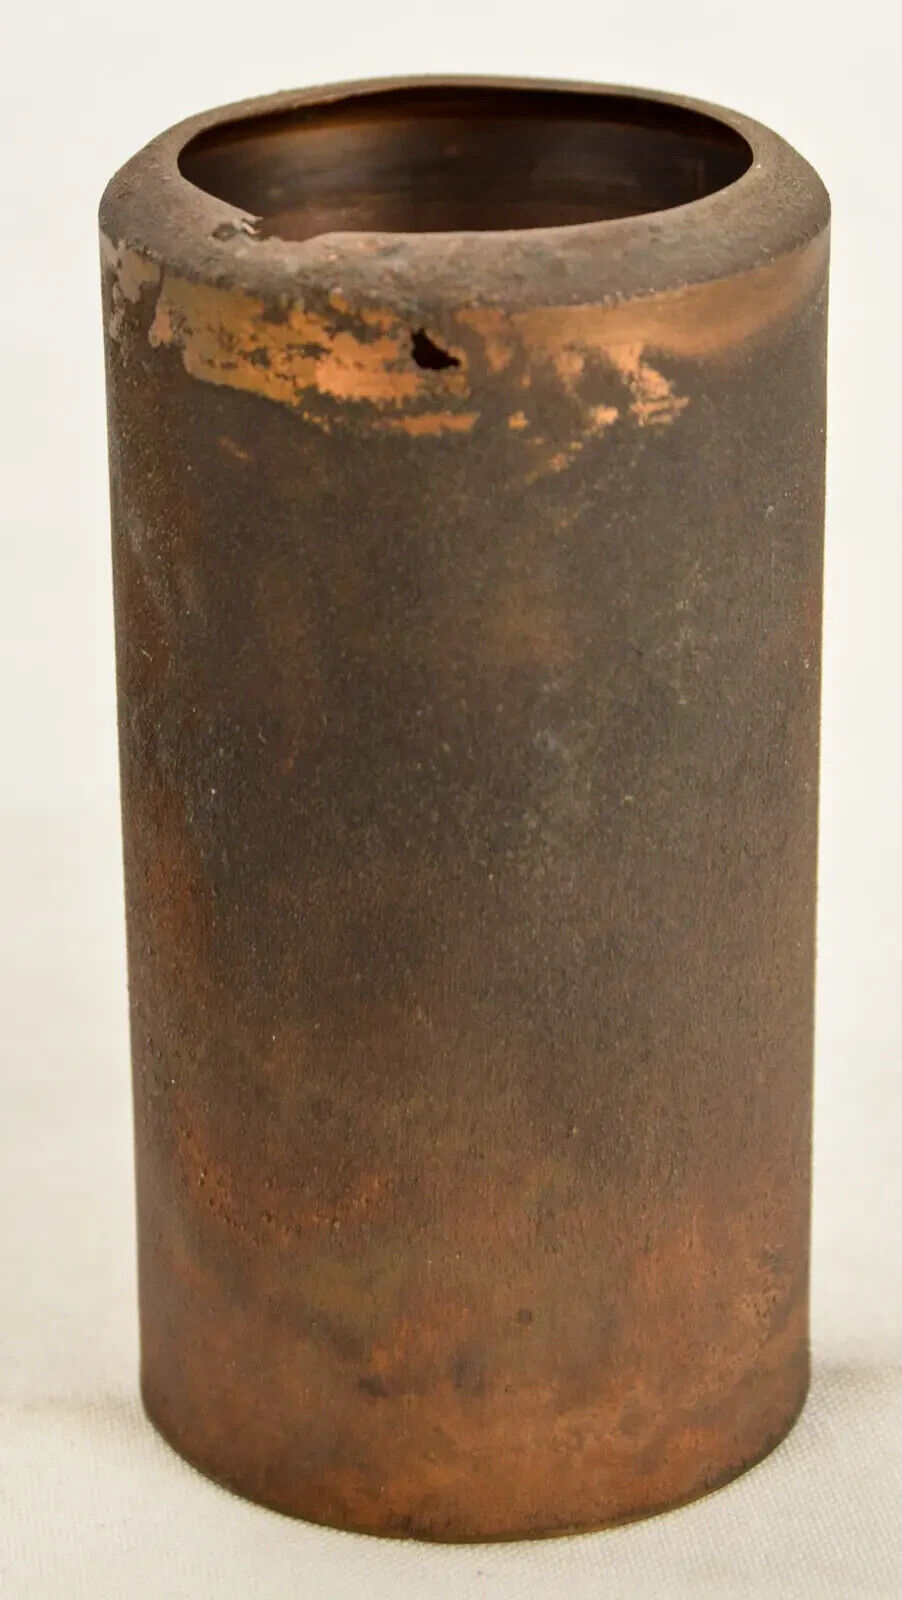 EXTREMELY RARE EDISON MOLD CYLINDER 8655 BLUE BELL